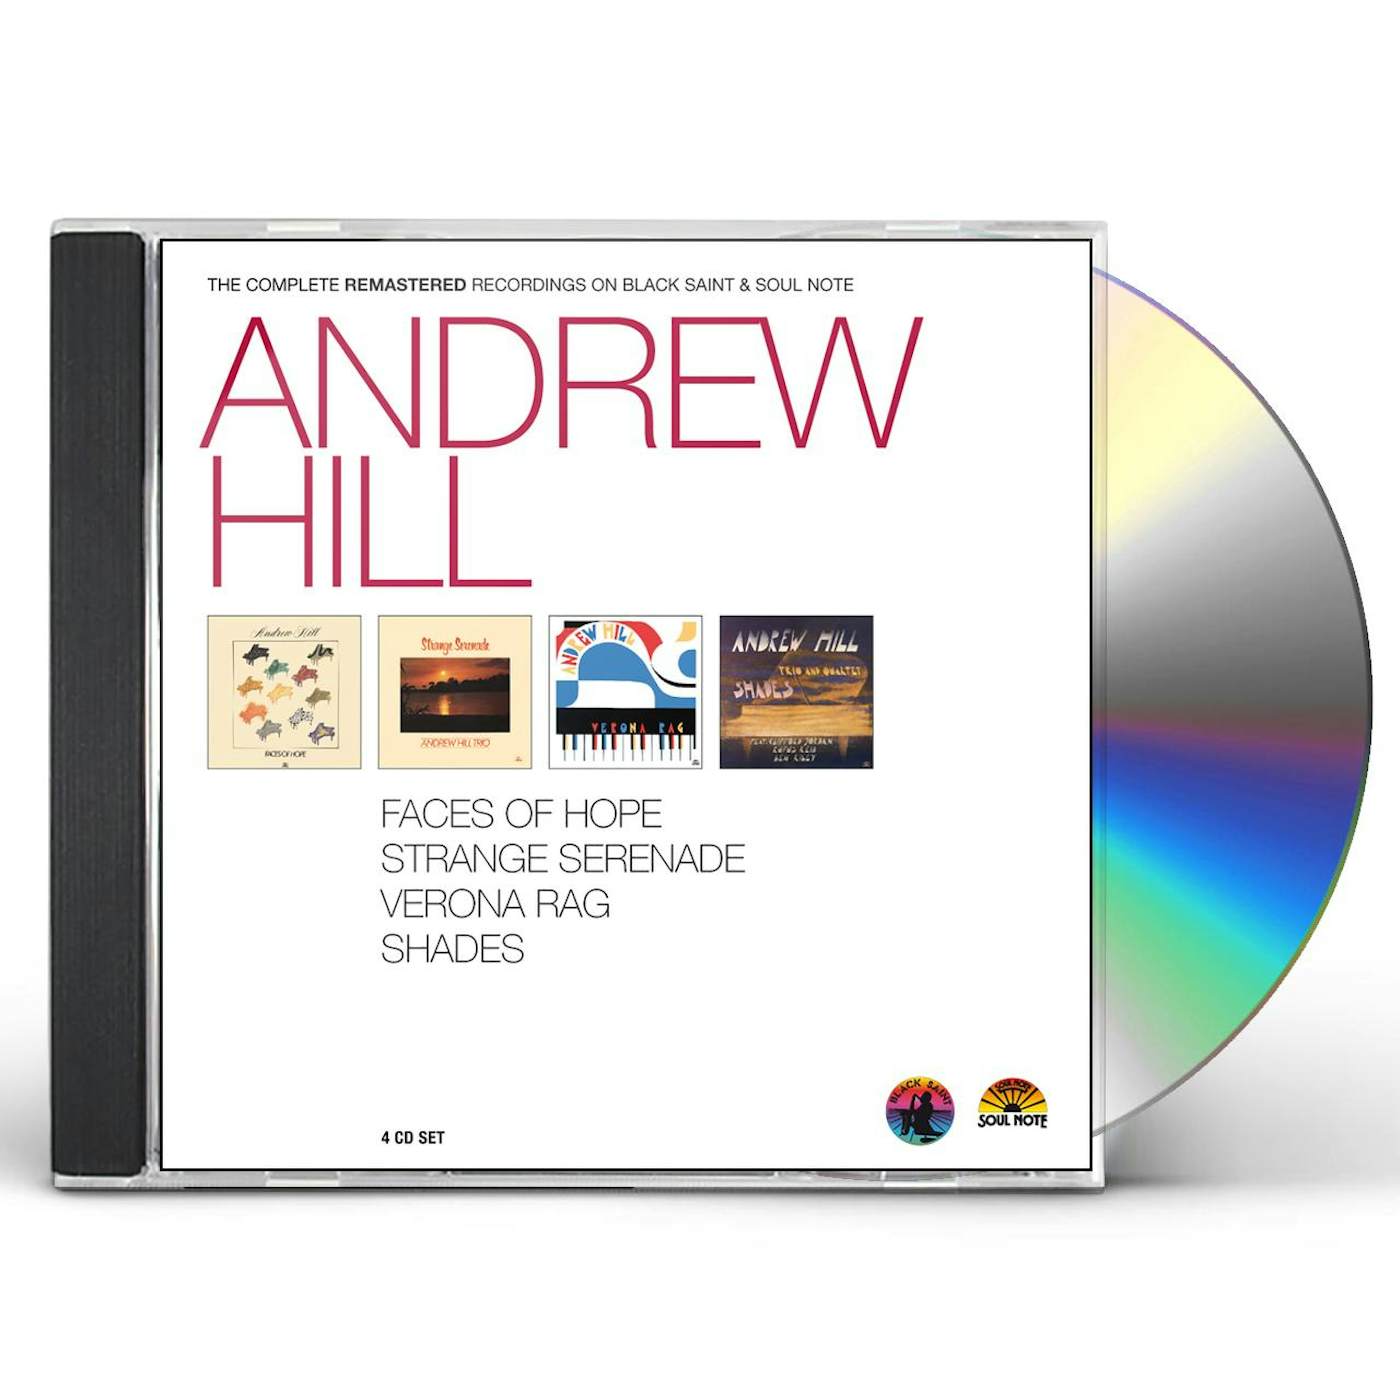 ANDREW HILL - THE COMPLETE REMASTERED RECORDINGS CD